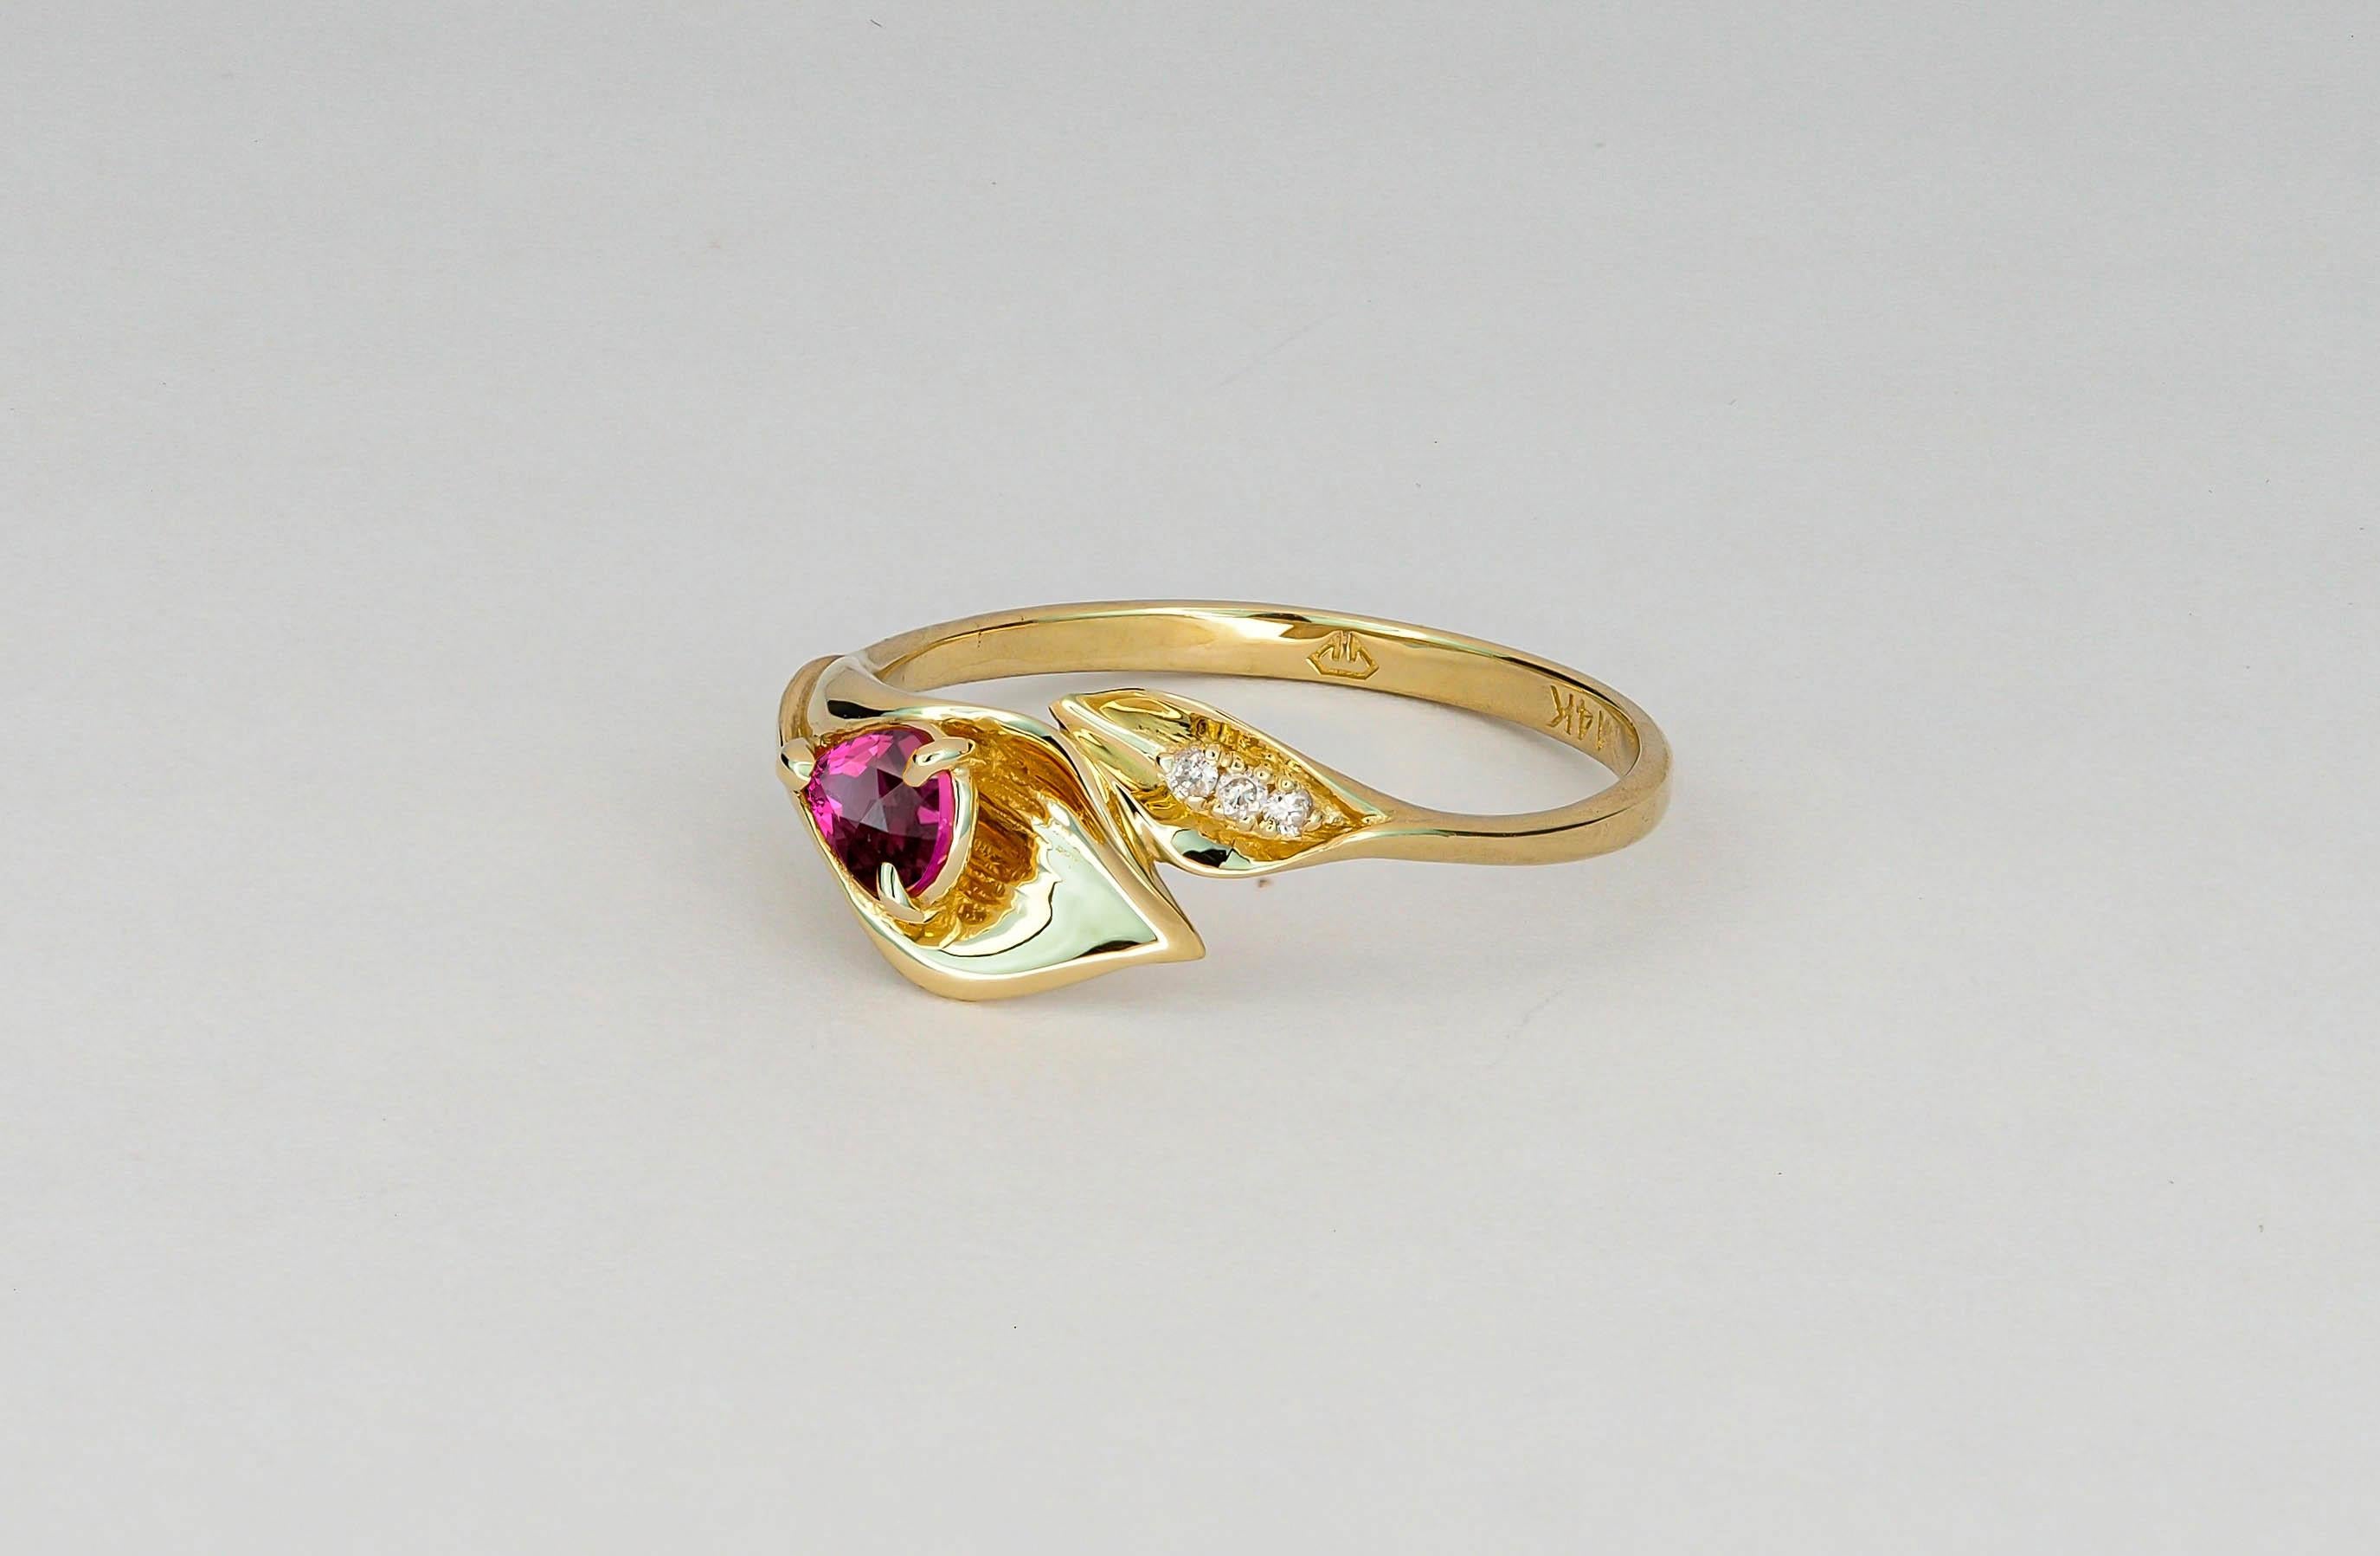 Pear Cut Lily Calla Gold Ring, 14 Karat Gold Ring with Garnet and Diamonds For Sale